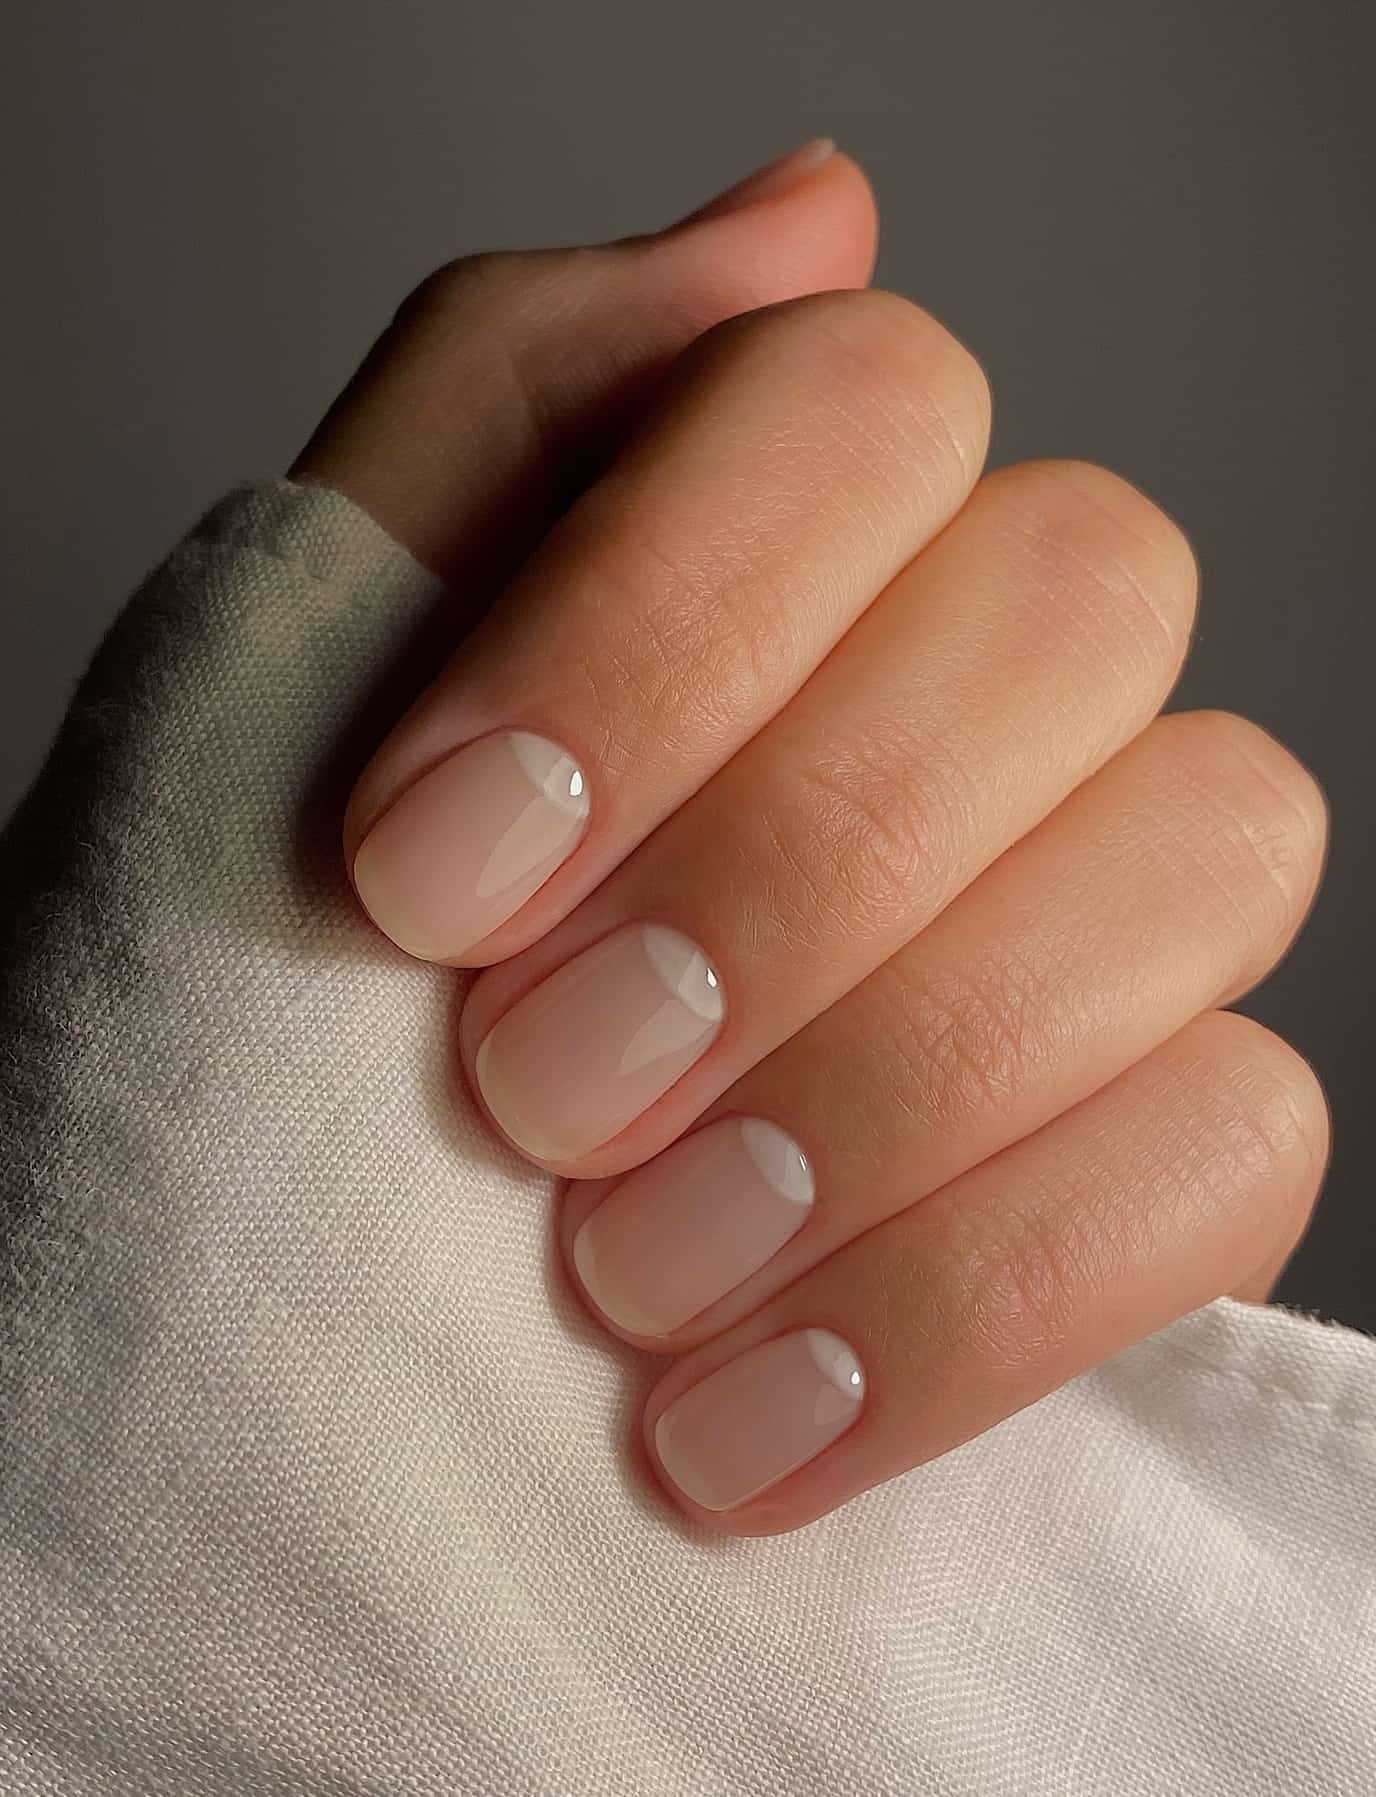 A hand with short squoval nails painted a glossy nude with white half moon details